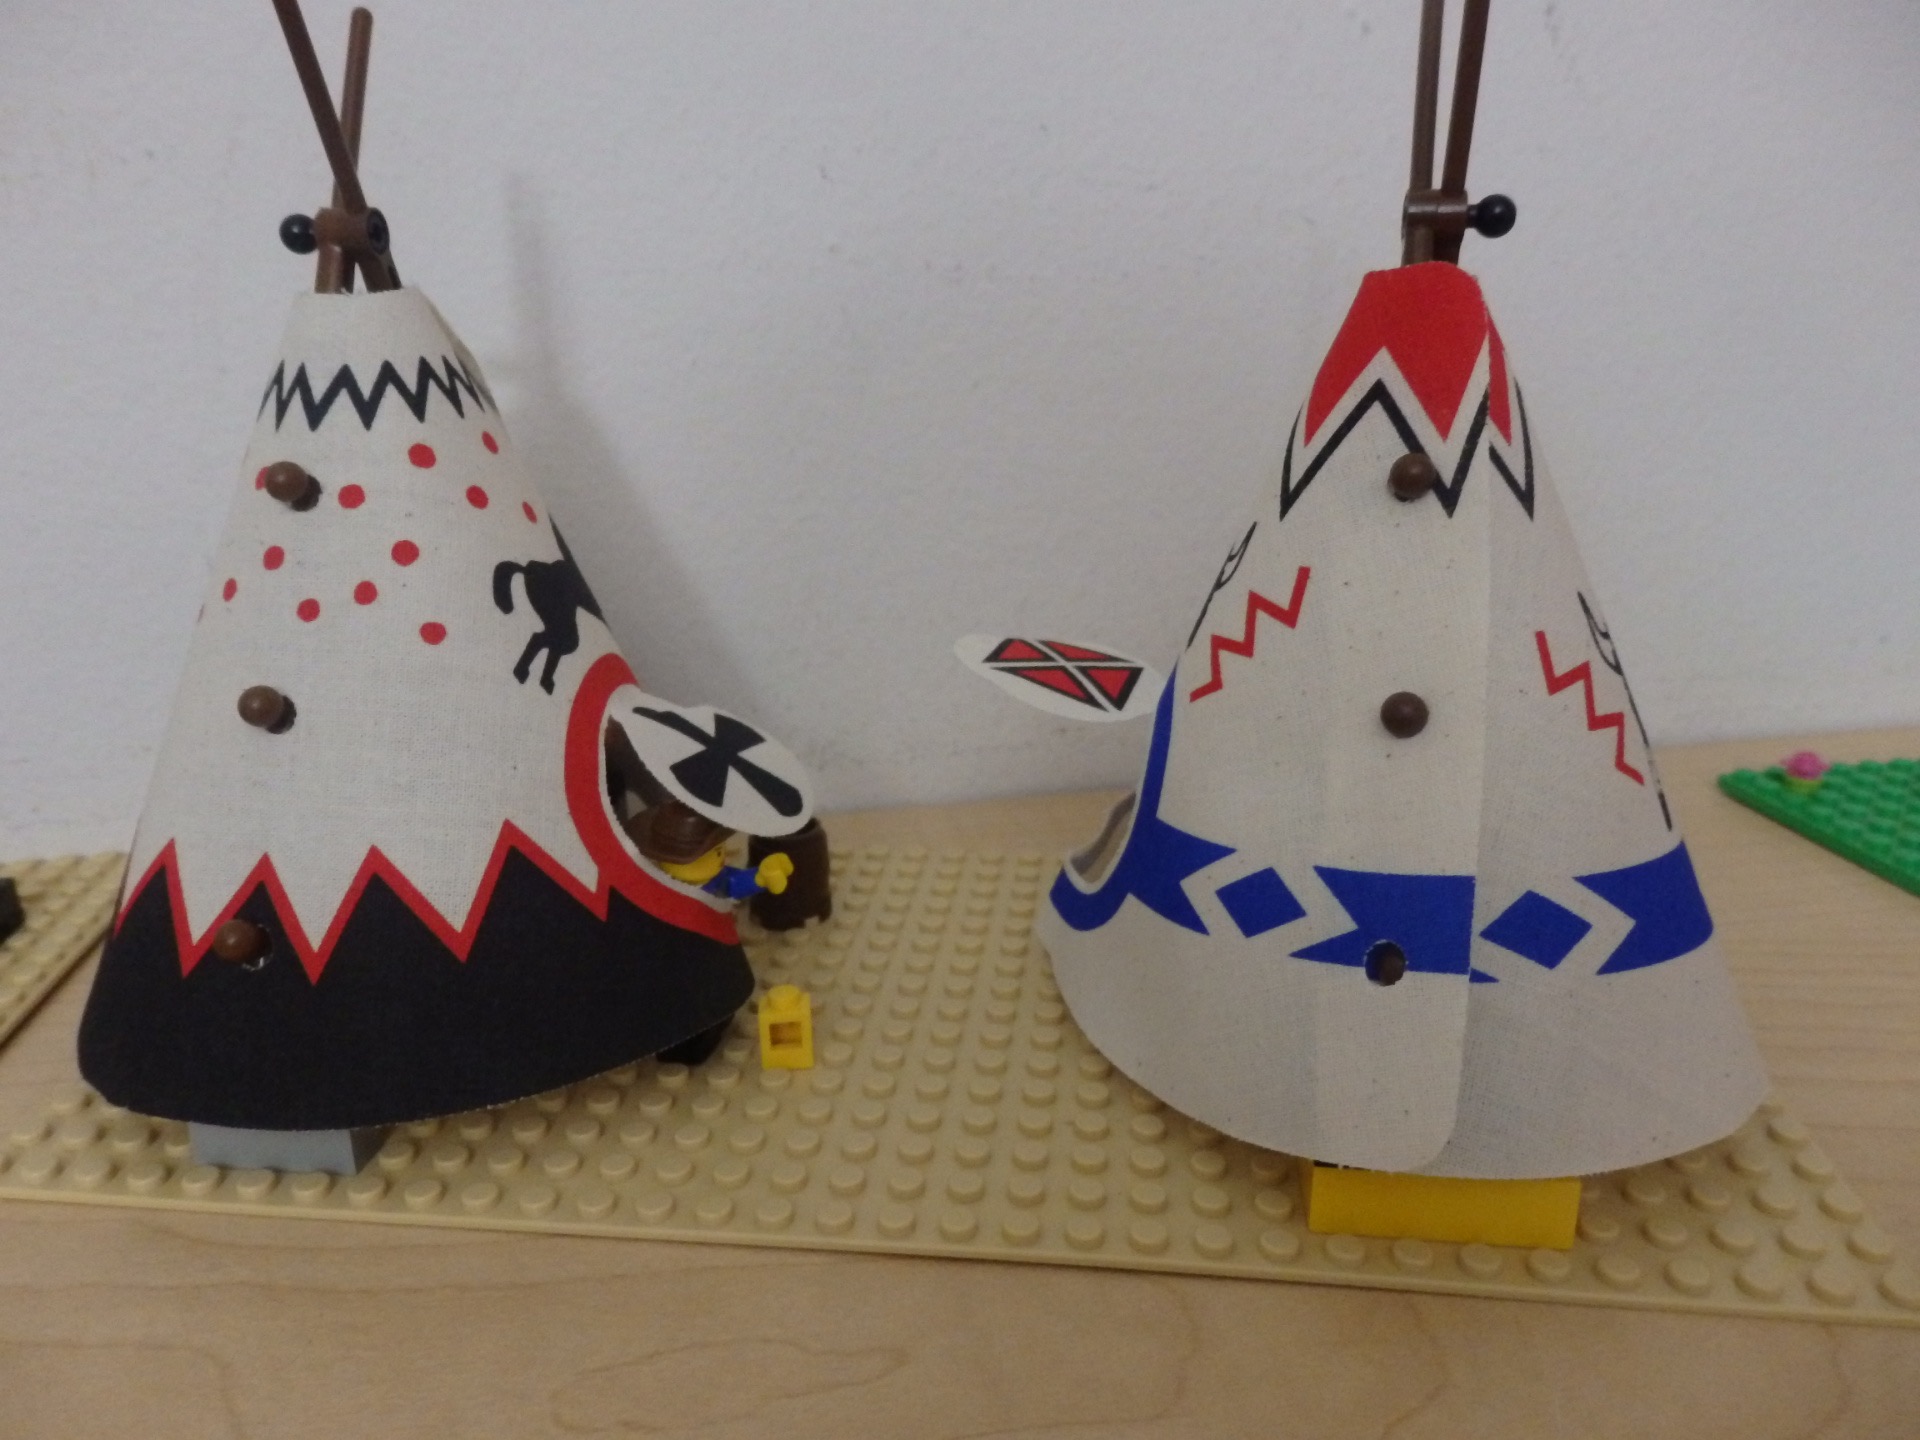 Lego figure sticking out of a teepee, reaching for a yellow block on the ground